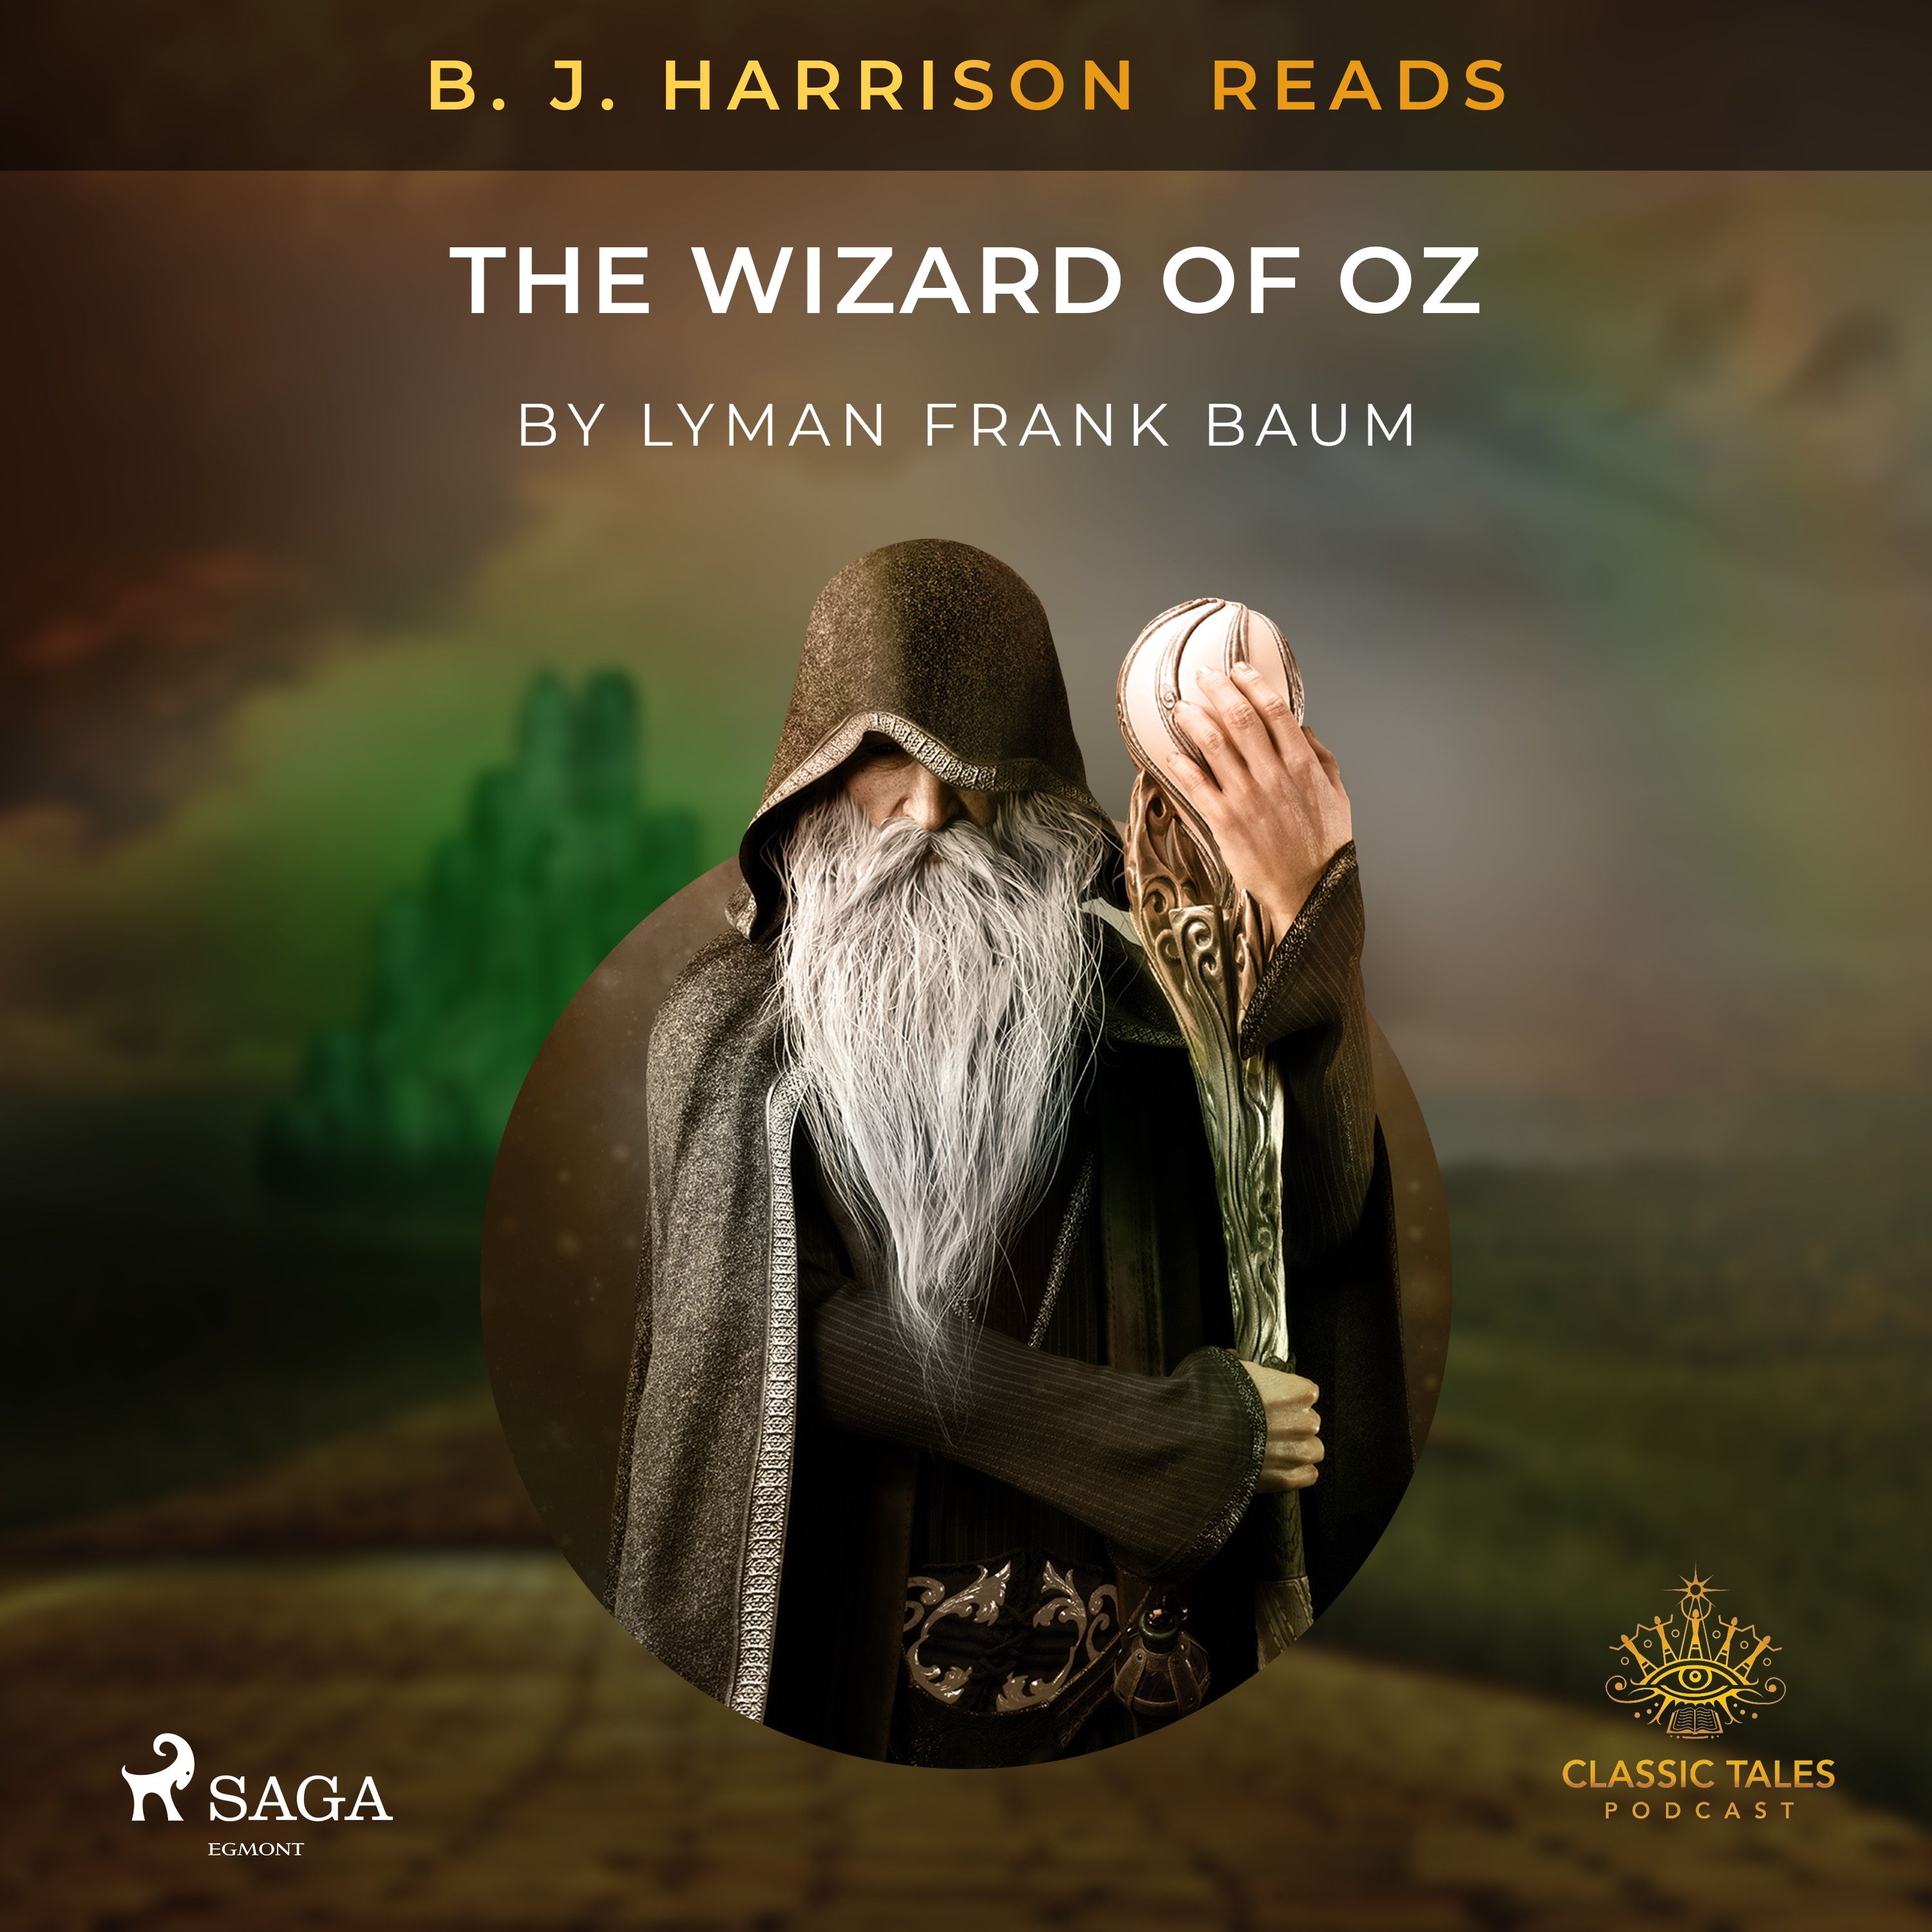 B. J. Harrison Reads The Wizard of Oz, audiobook by L. Frank. Baum